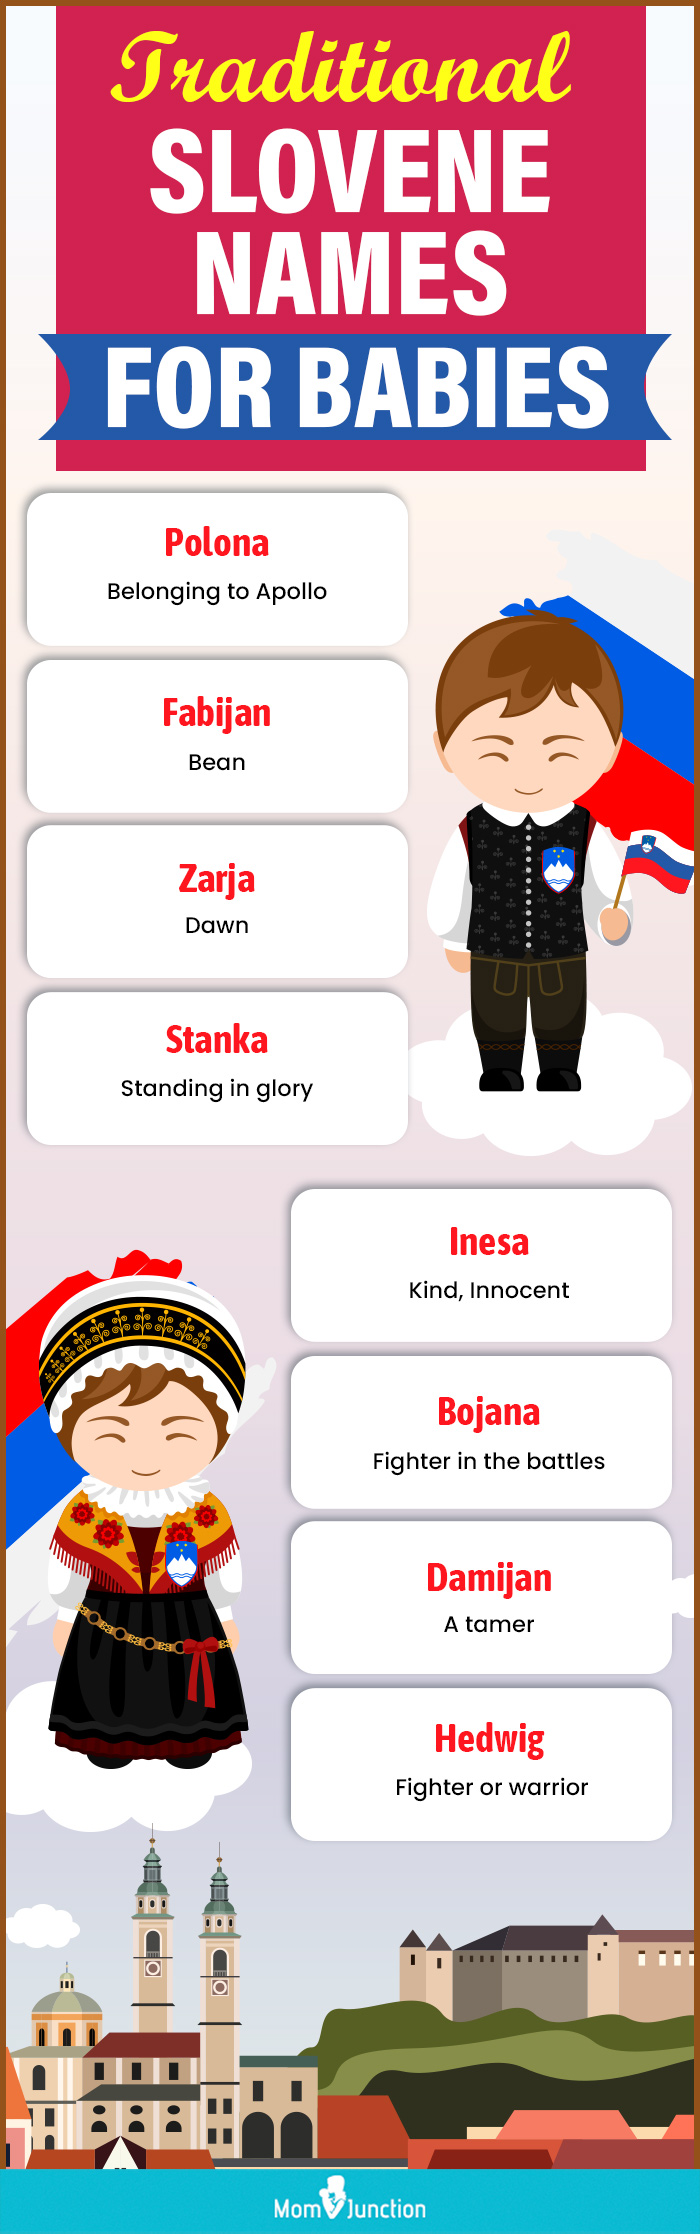 traditional slovene names for babies (infographic)